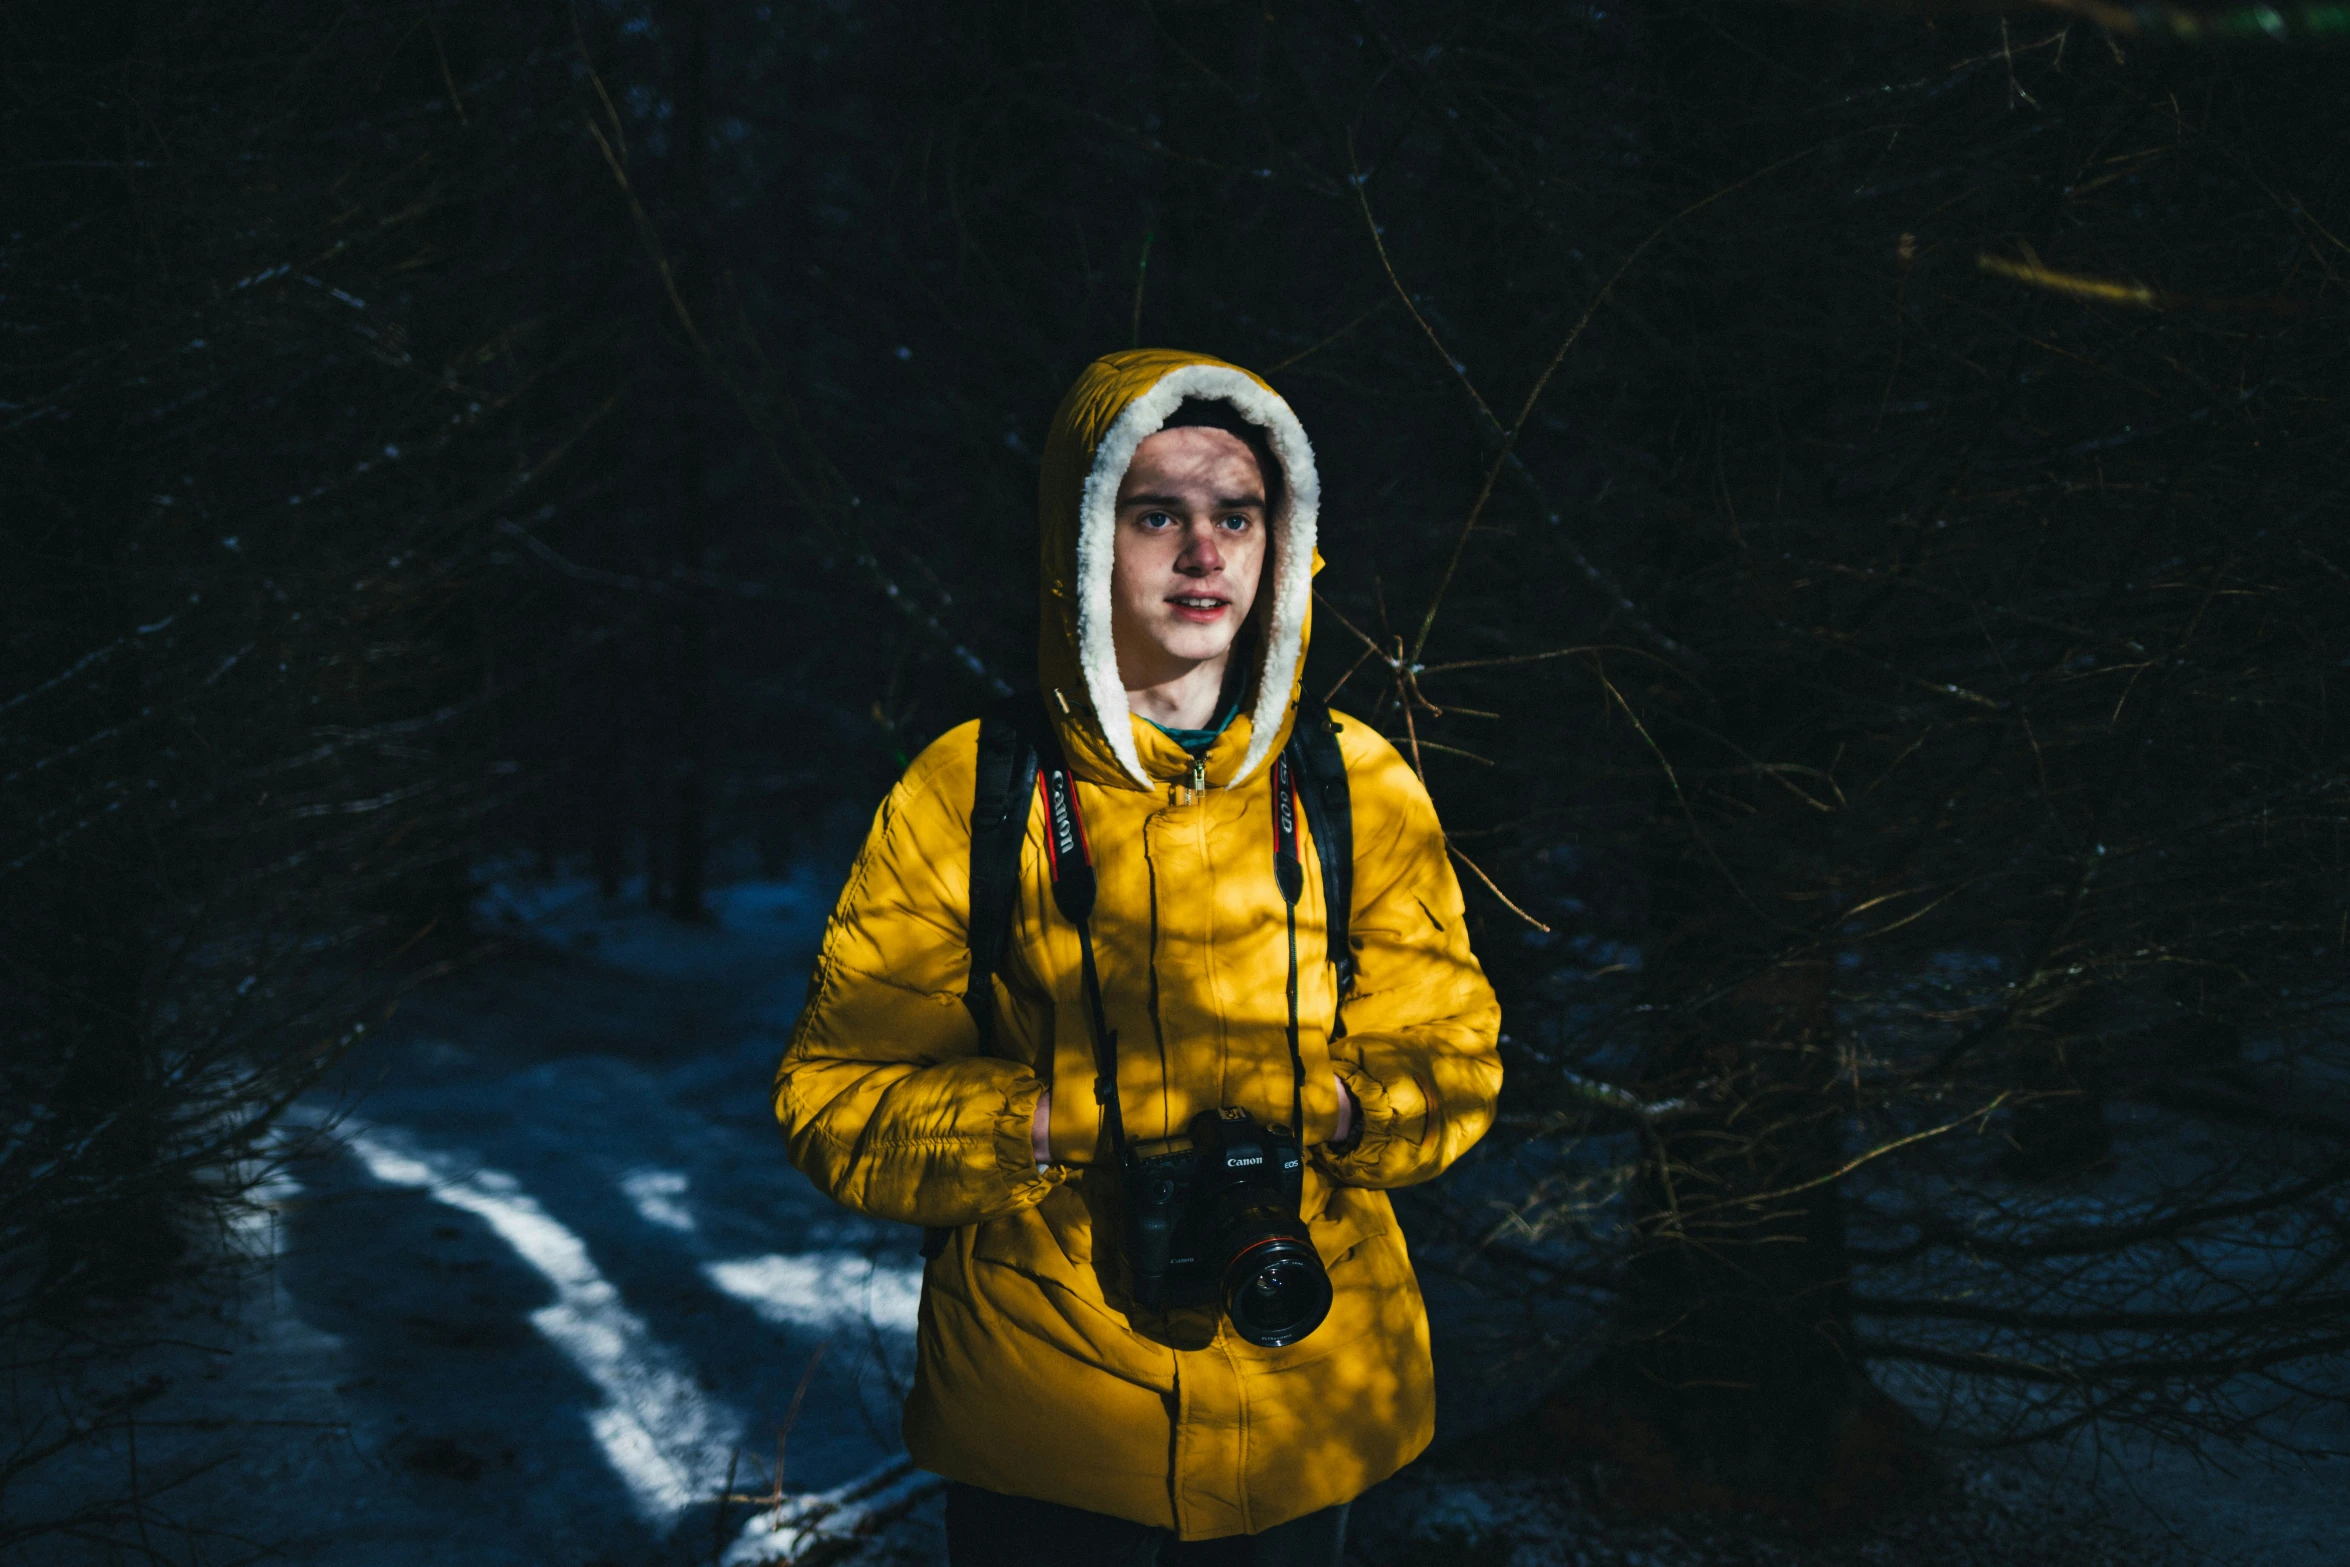 man in yellow jacket on snow covered path in forest